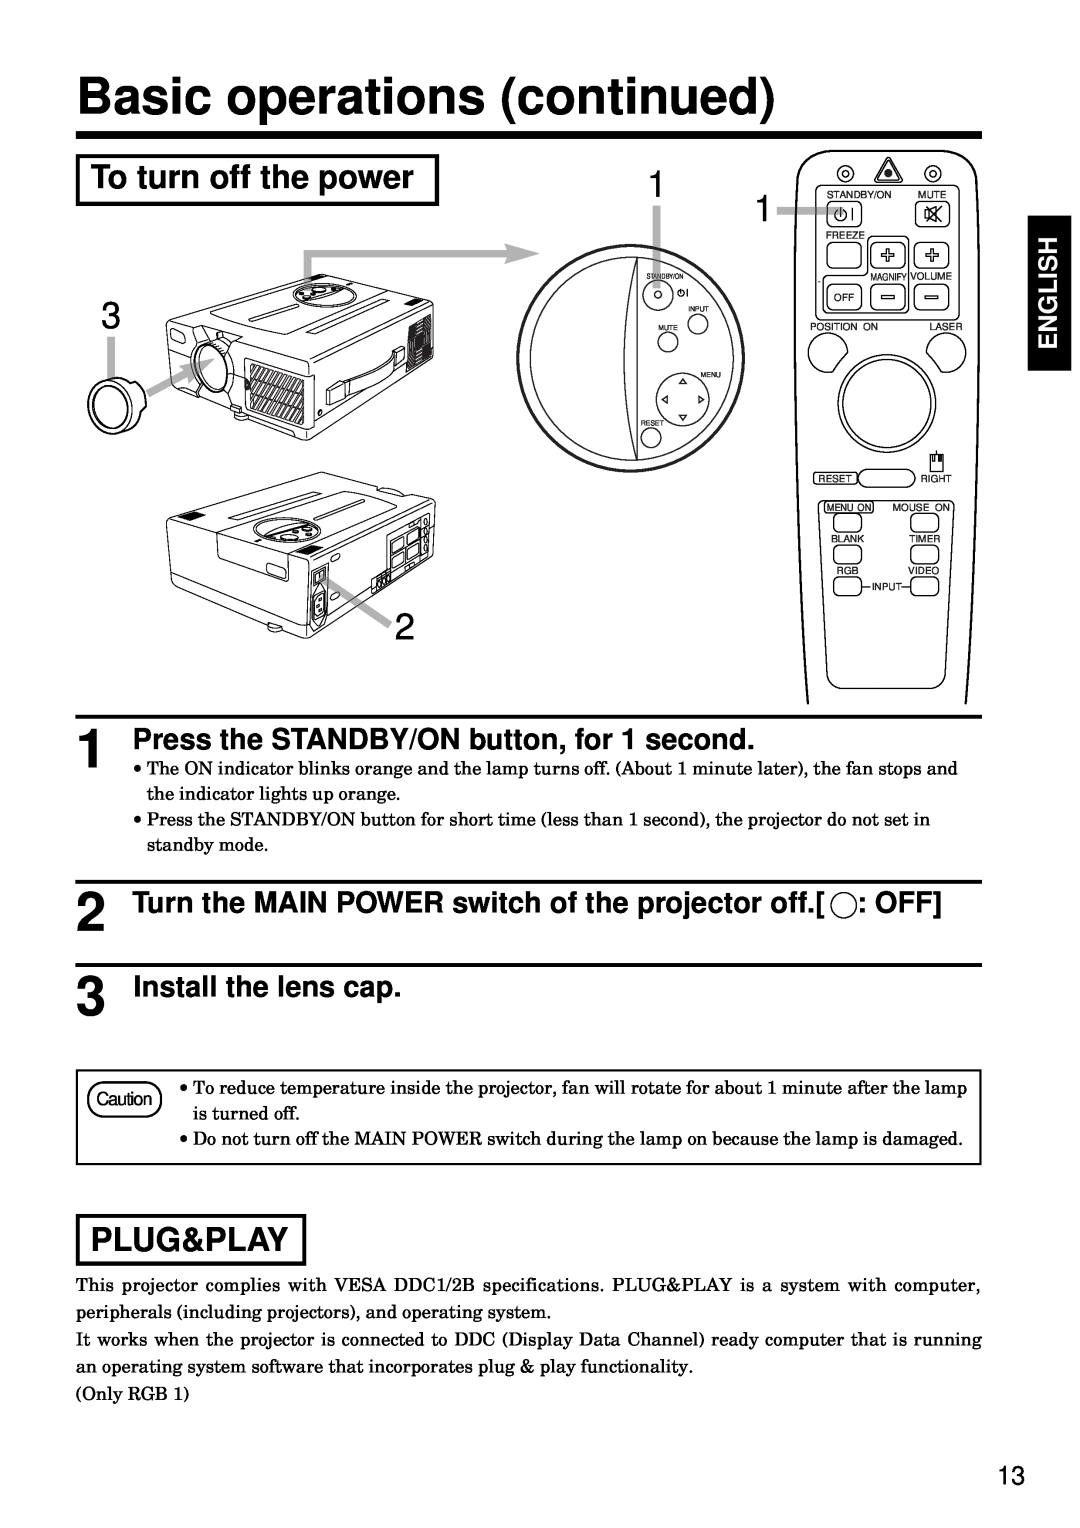 BOXLIGHT MP-93i Basic operations continued, To turn off the power, Plug&Play, Press the STANDBY/ON button, for 1 second 